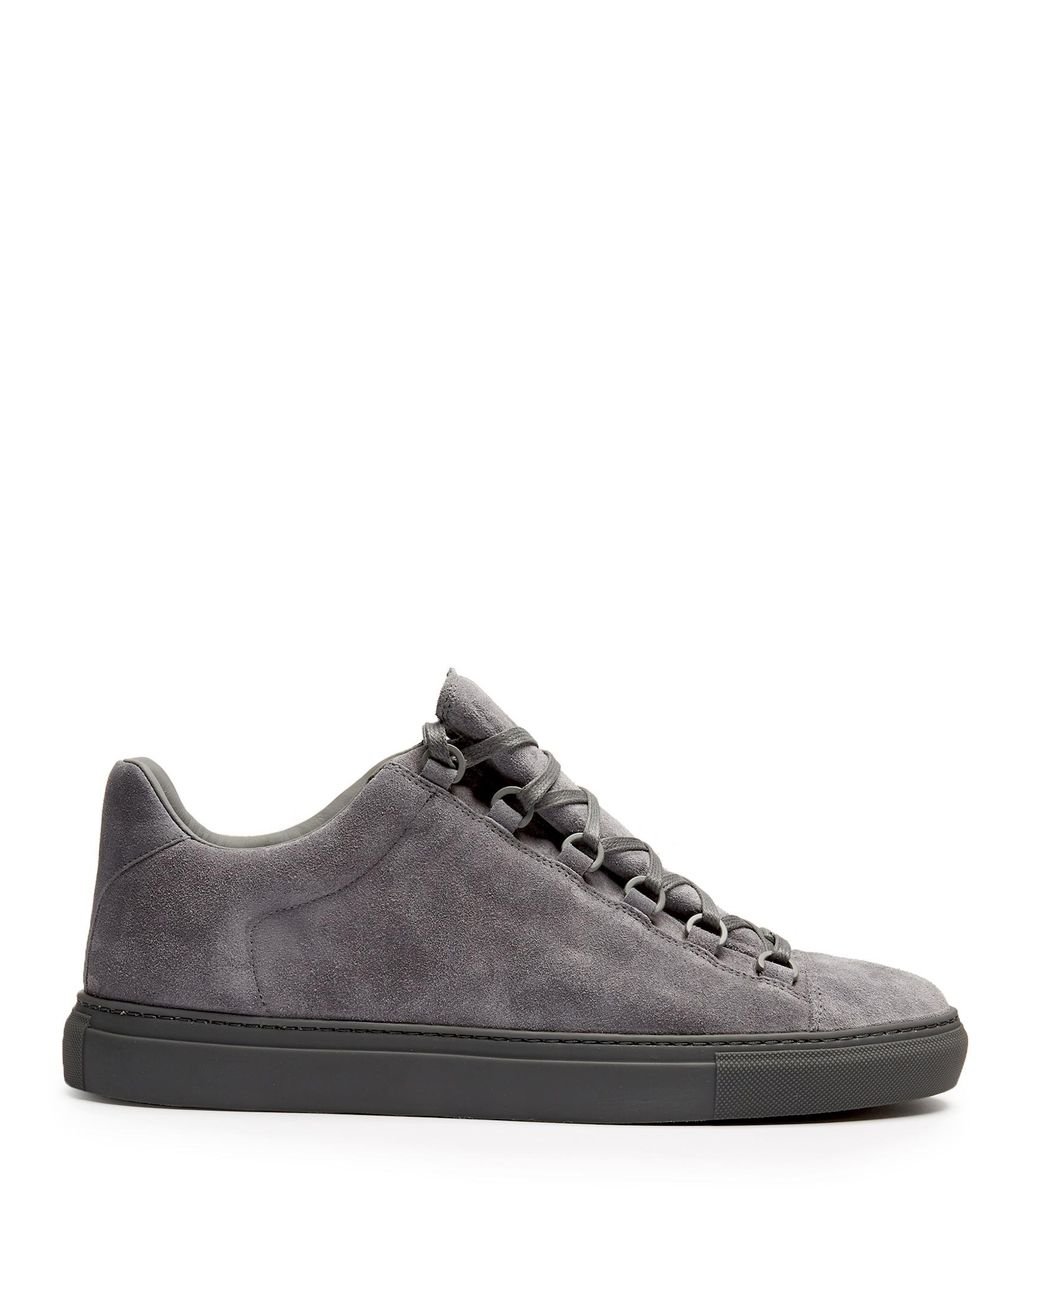 Balenciaga Arena Lowtop Suede Trainers in Gray for Men  Lyst